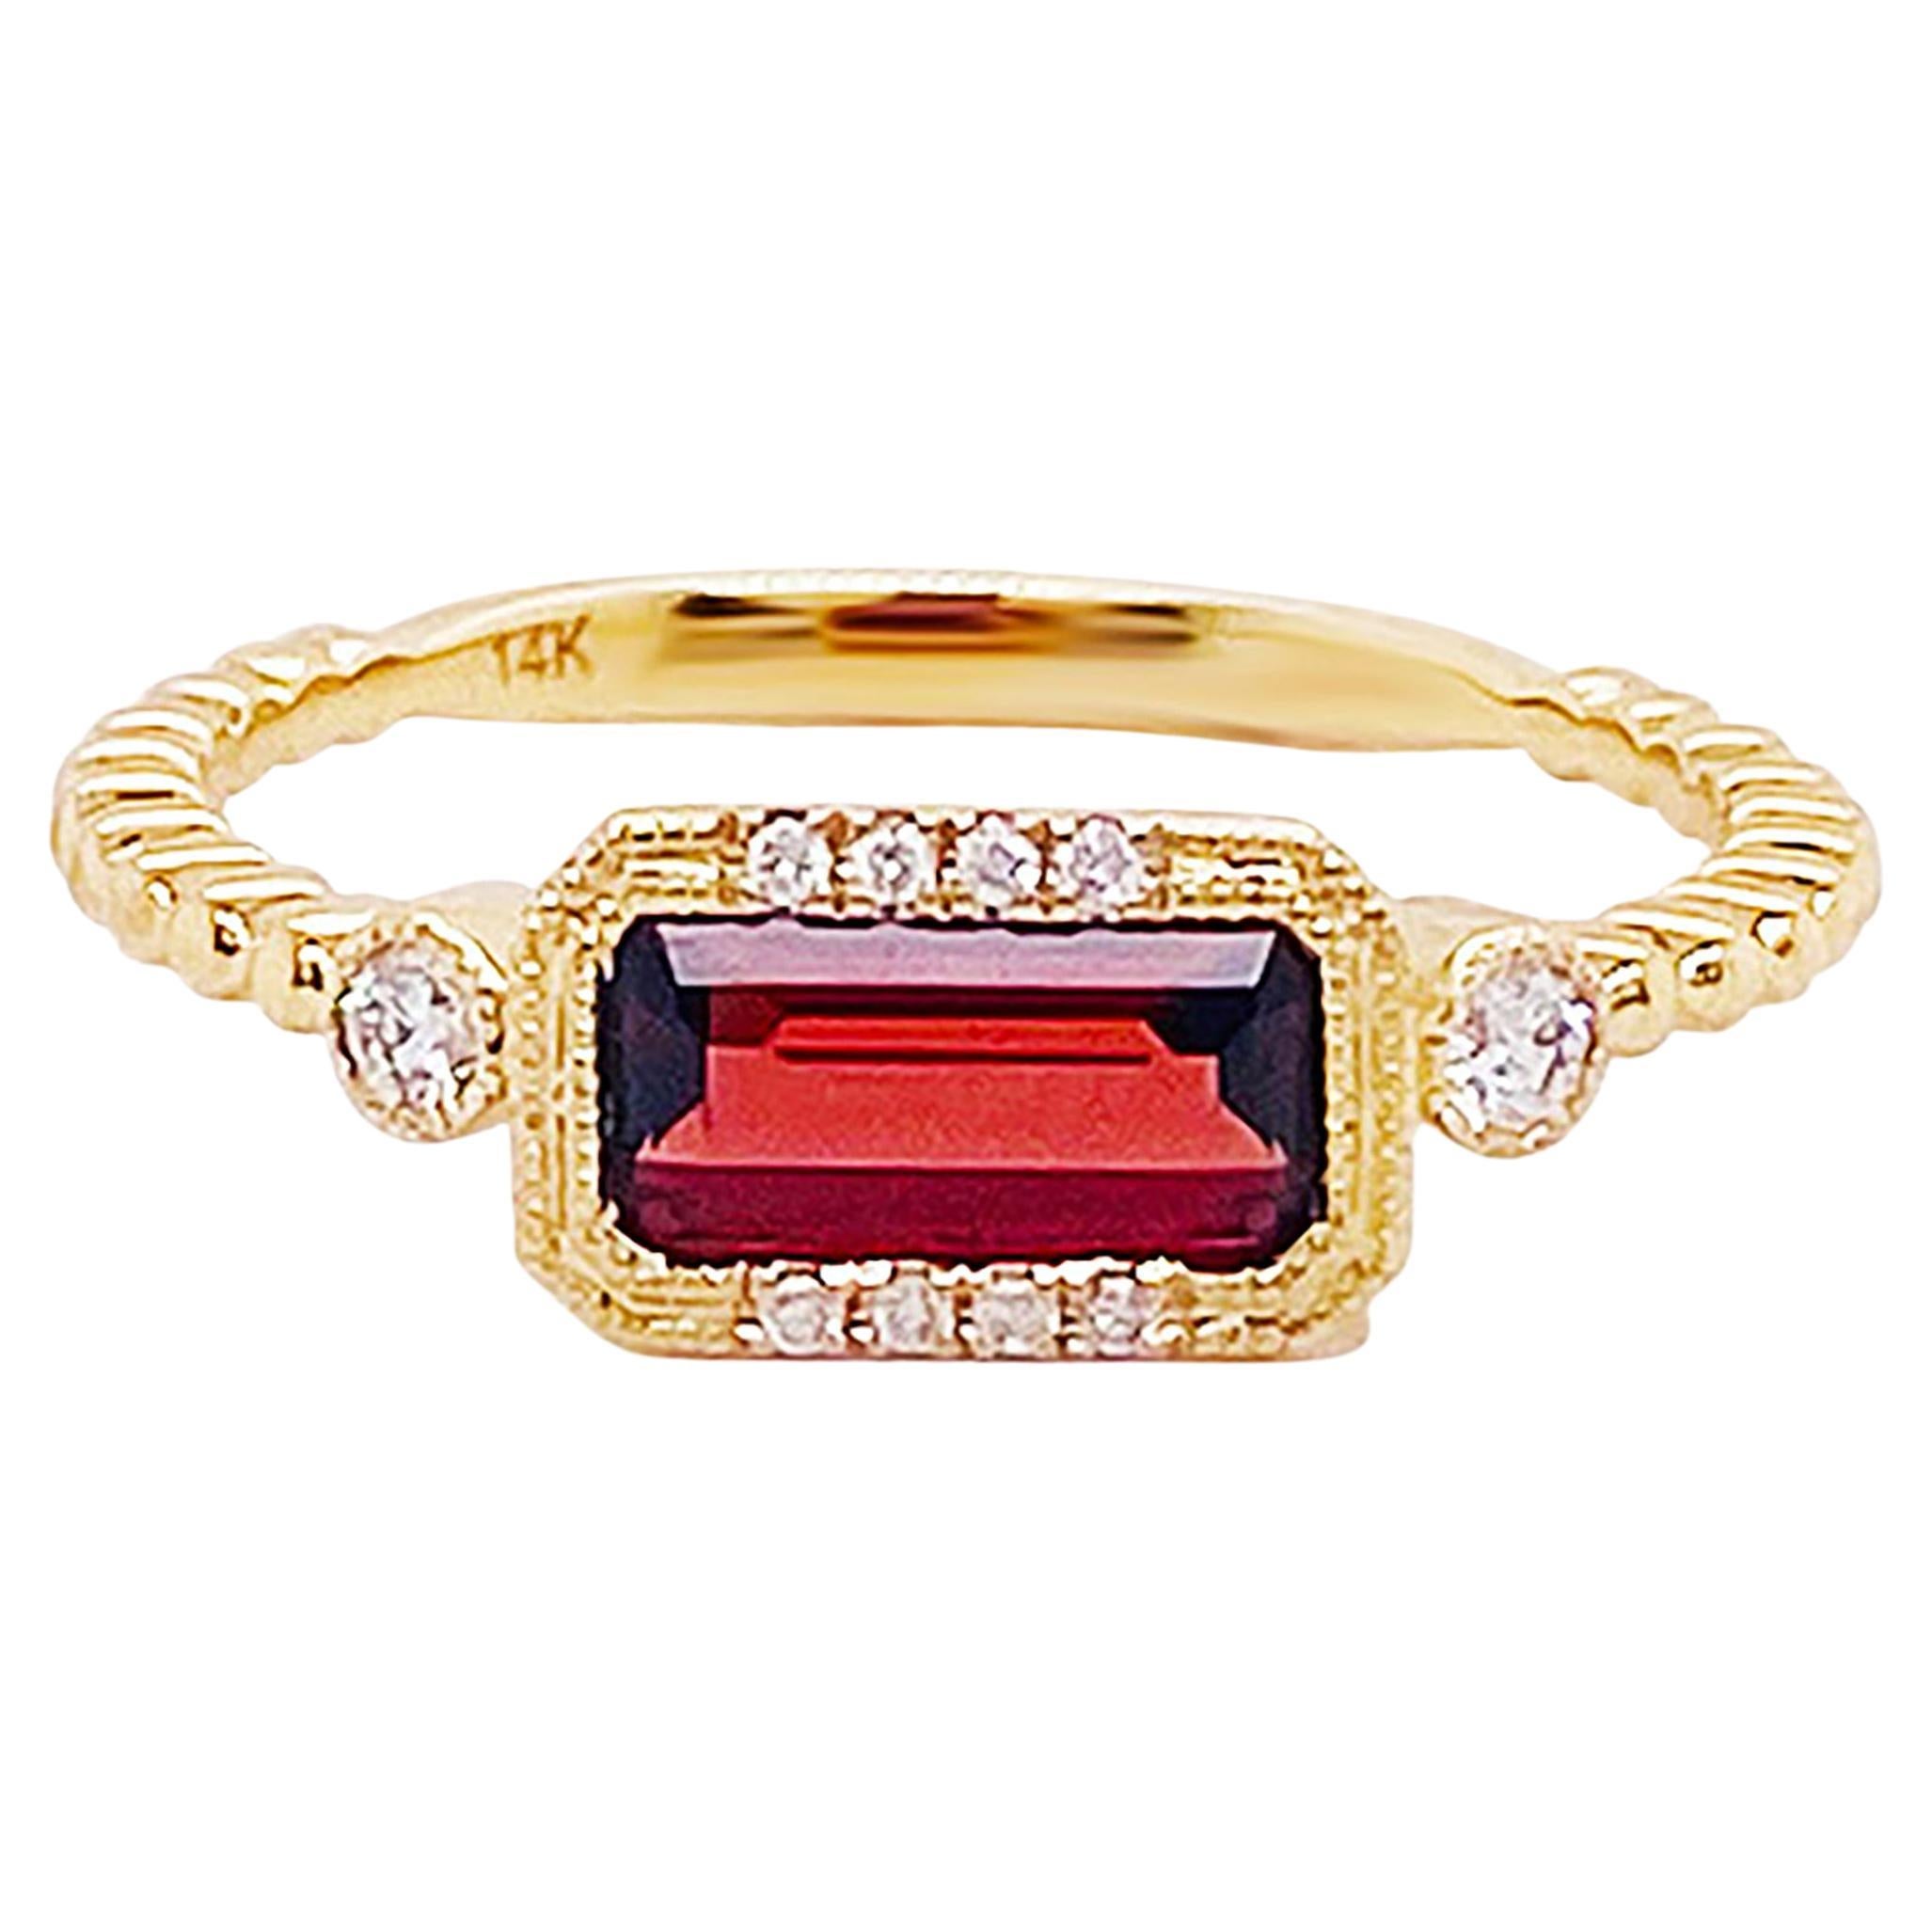 For Sale:  Garnet Diamond Ring January East to West 14K Gold Yellow Gold